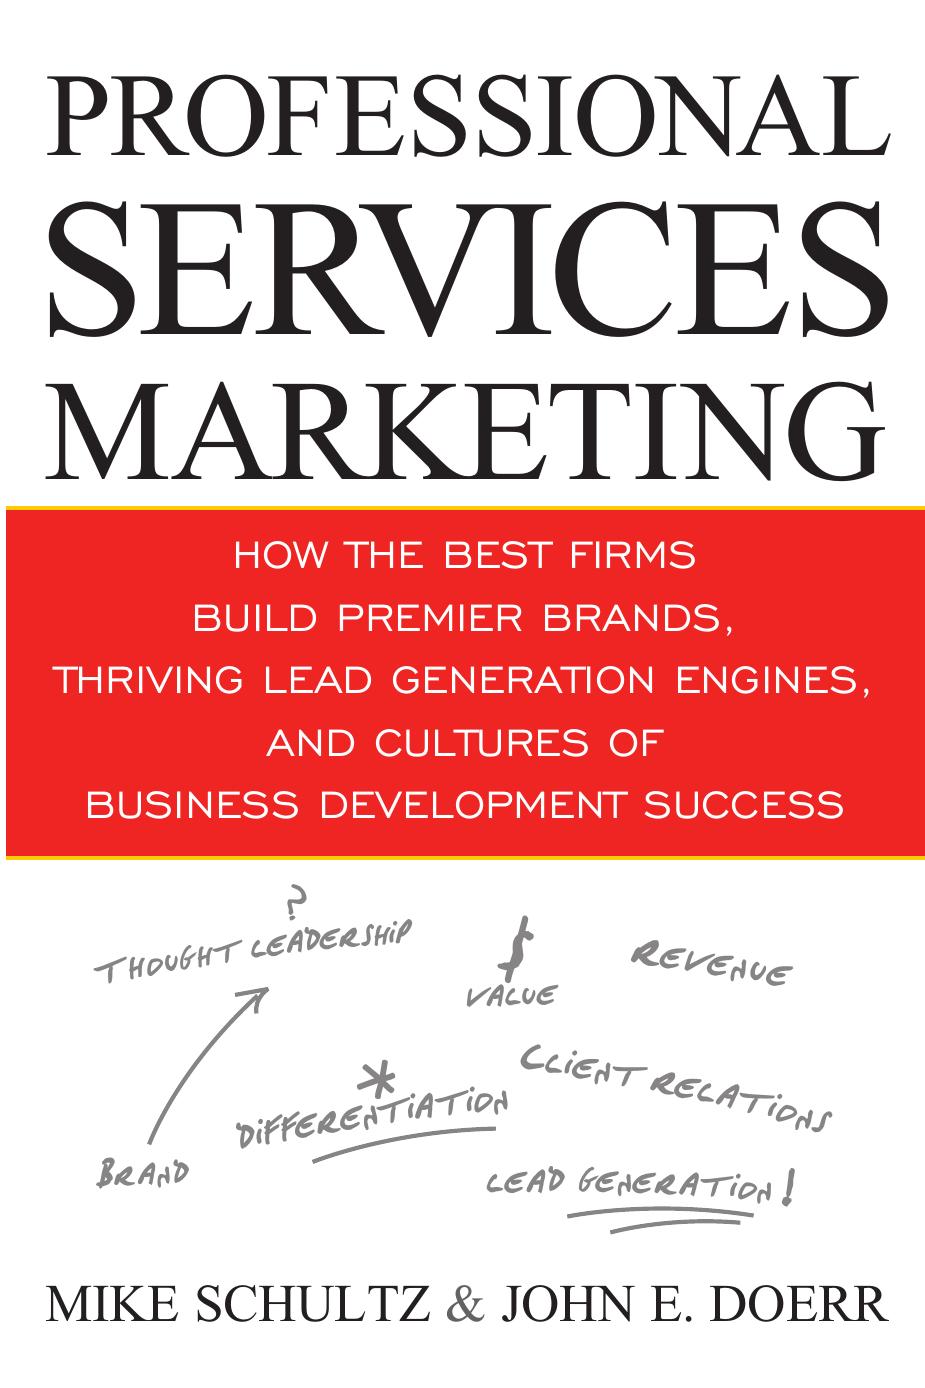 Professional Services Marketing  How the Best Firms Build Premier Brands, Thriving Lead Generation Engines, and Cultures of Business Development Success  2009